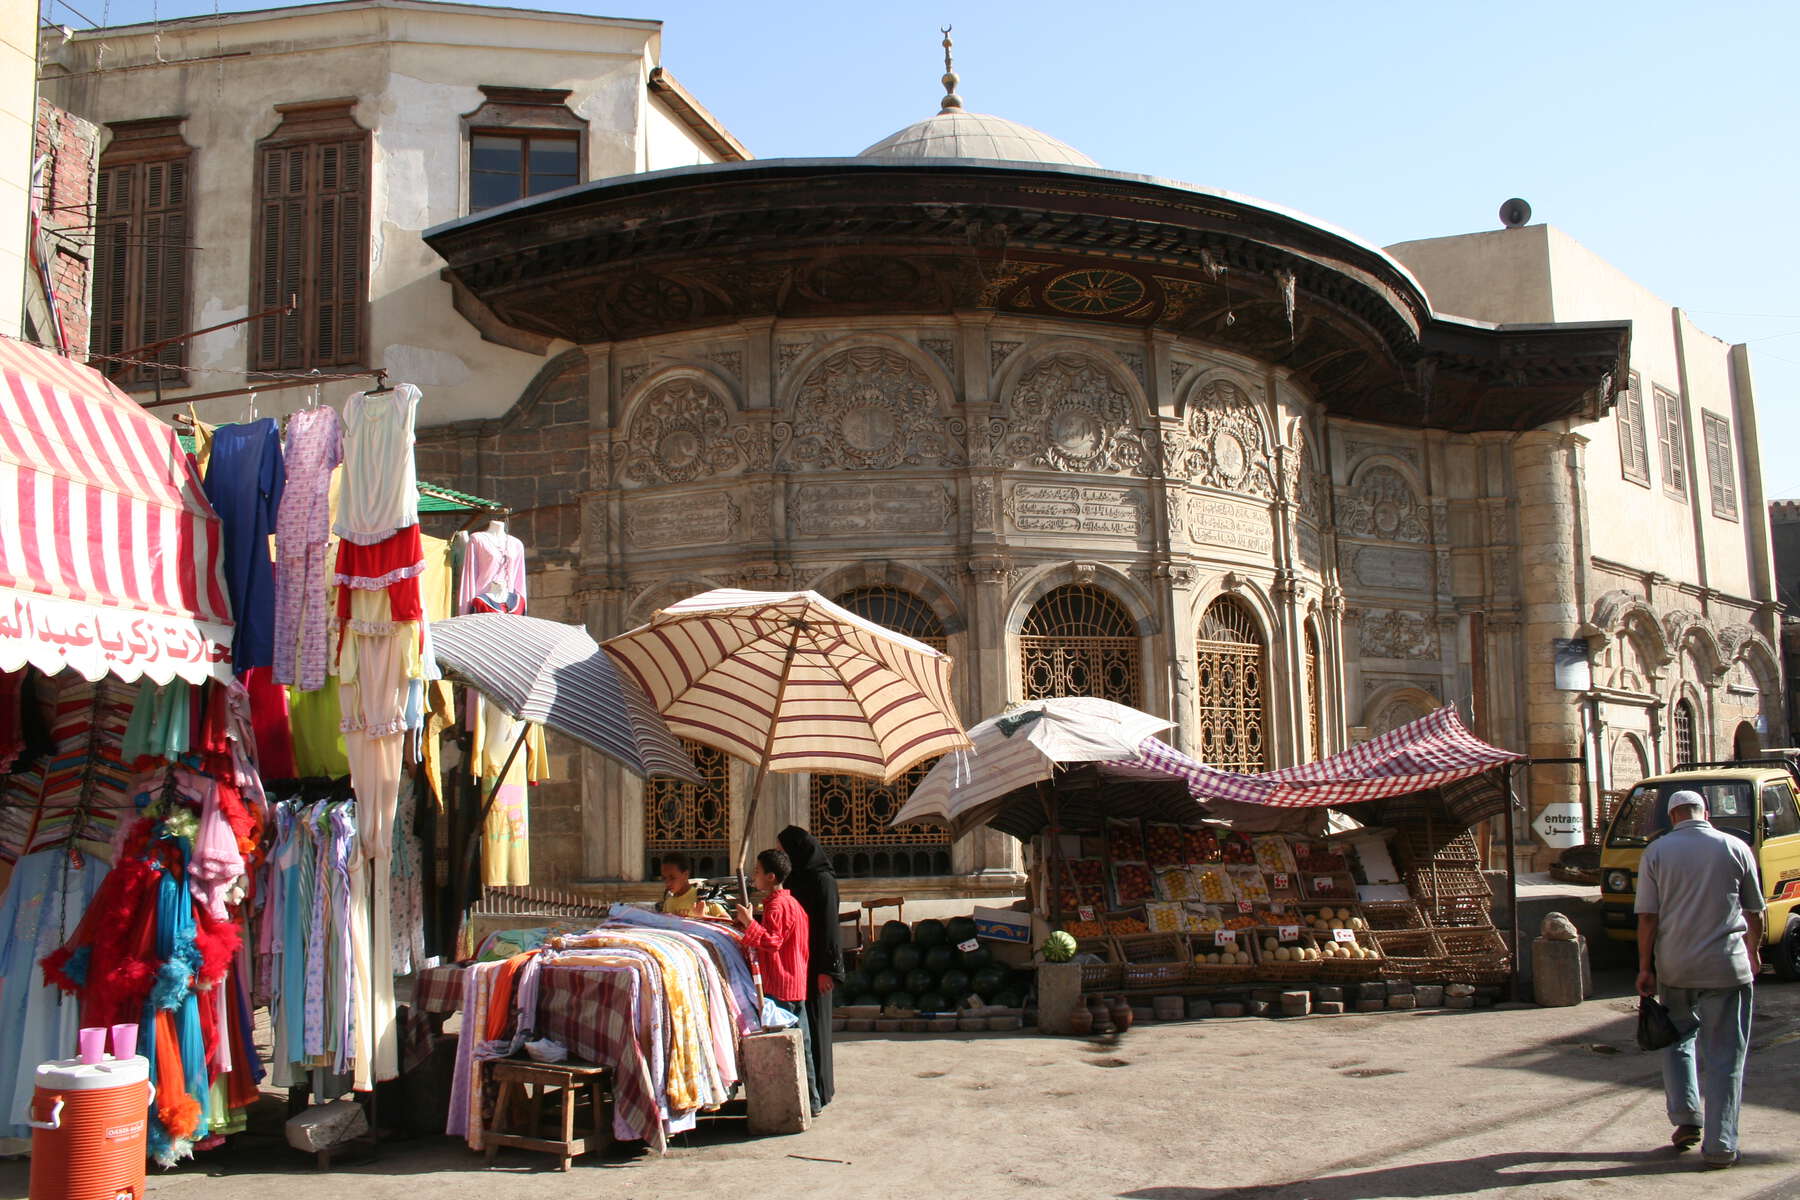 Street market selling food and clothes in front of a dome-shaped sabil covered with ornamentation and arches at the bottom.